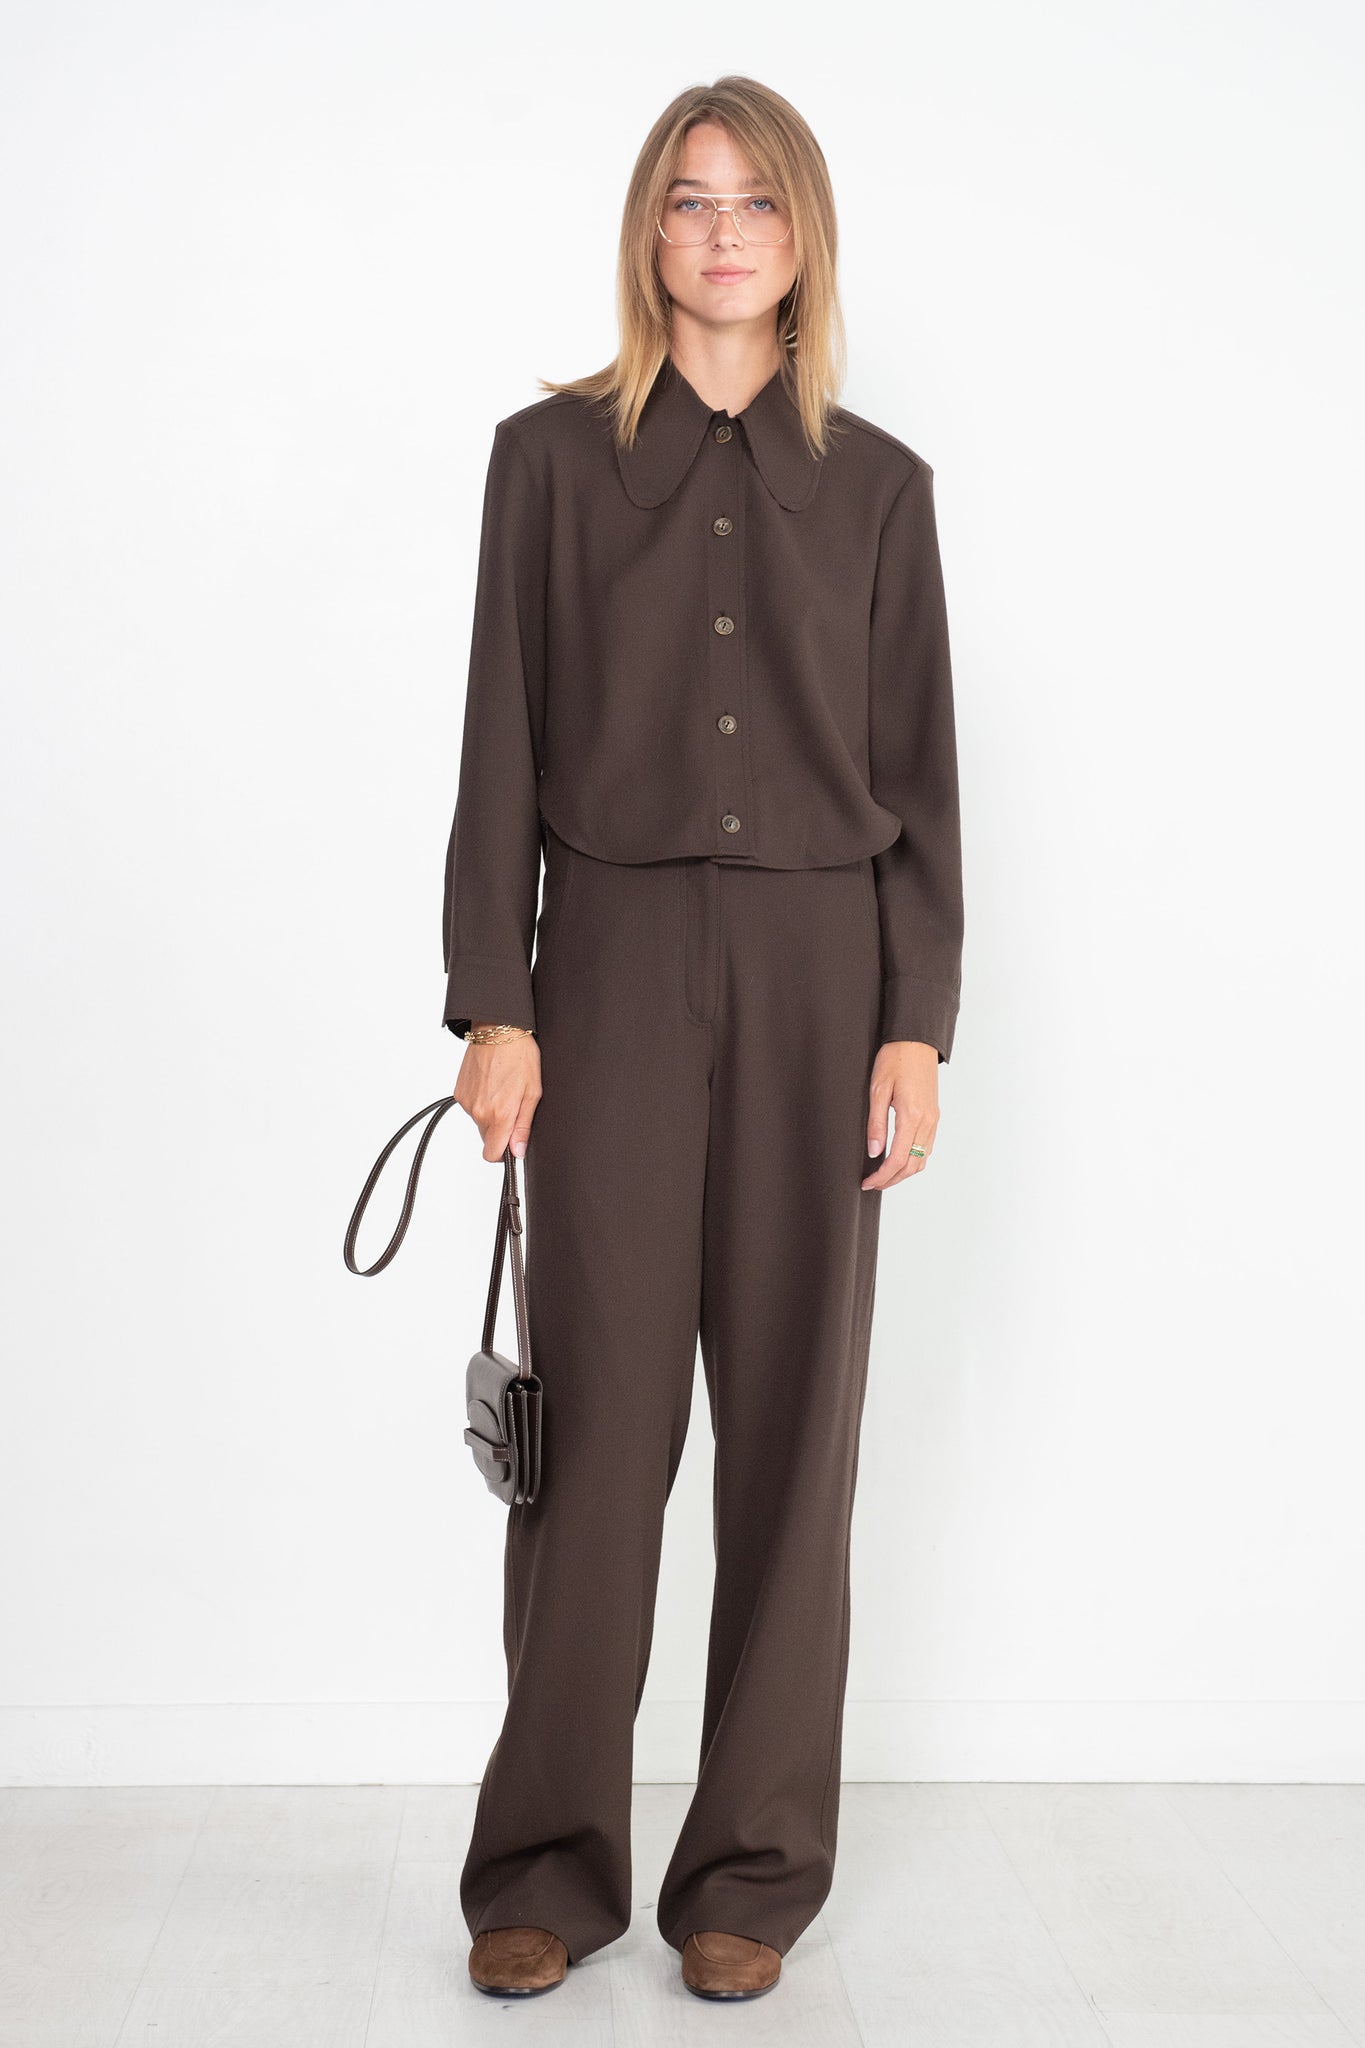 Veronique Leroy - Rounded Collar Shirt, Chocolate